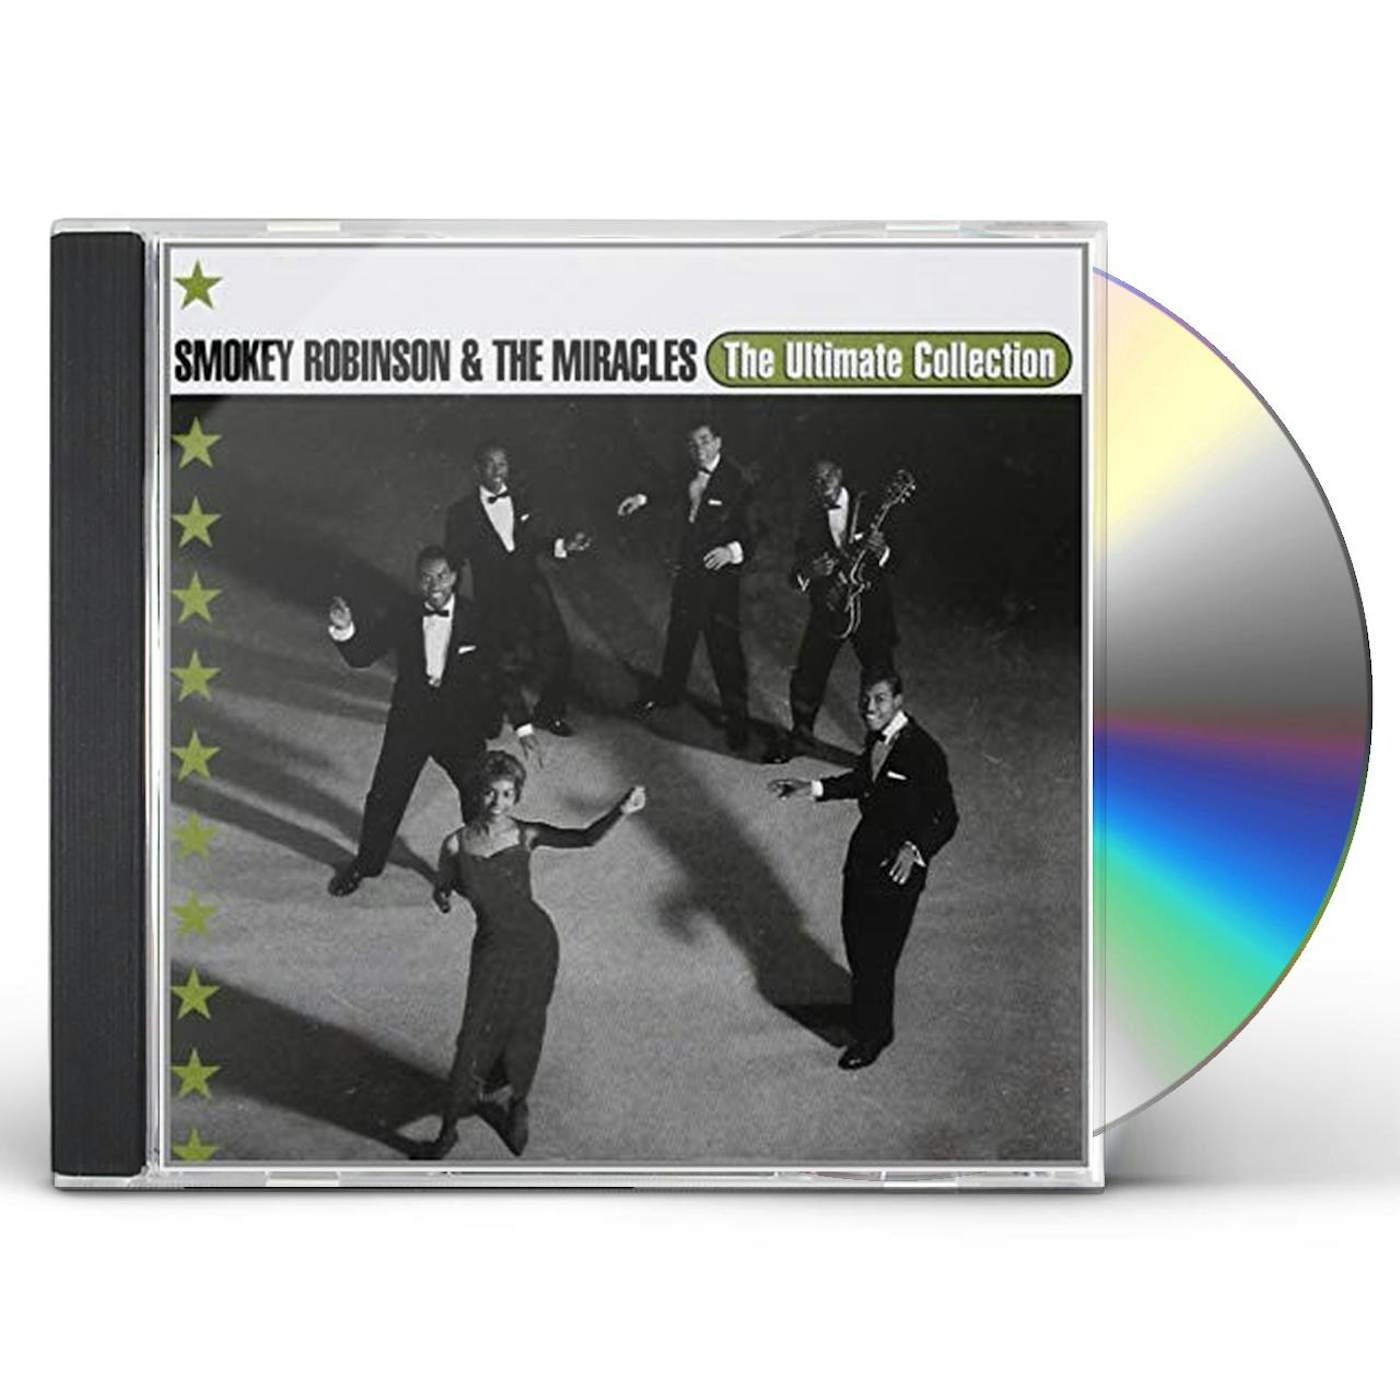 Smokey Robinson & The Miracles ULTIMATE COLLECTION CD